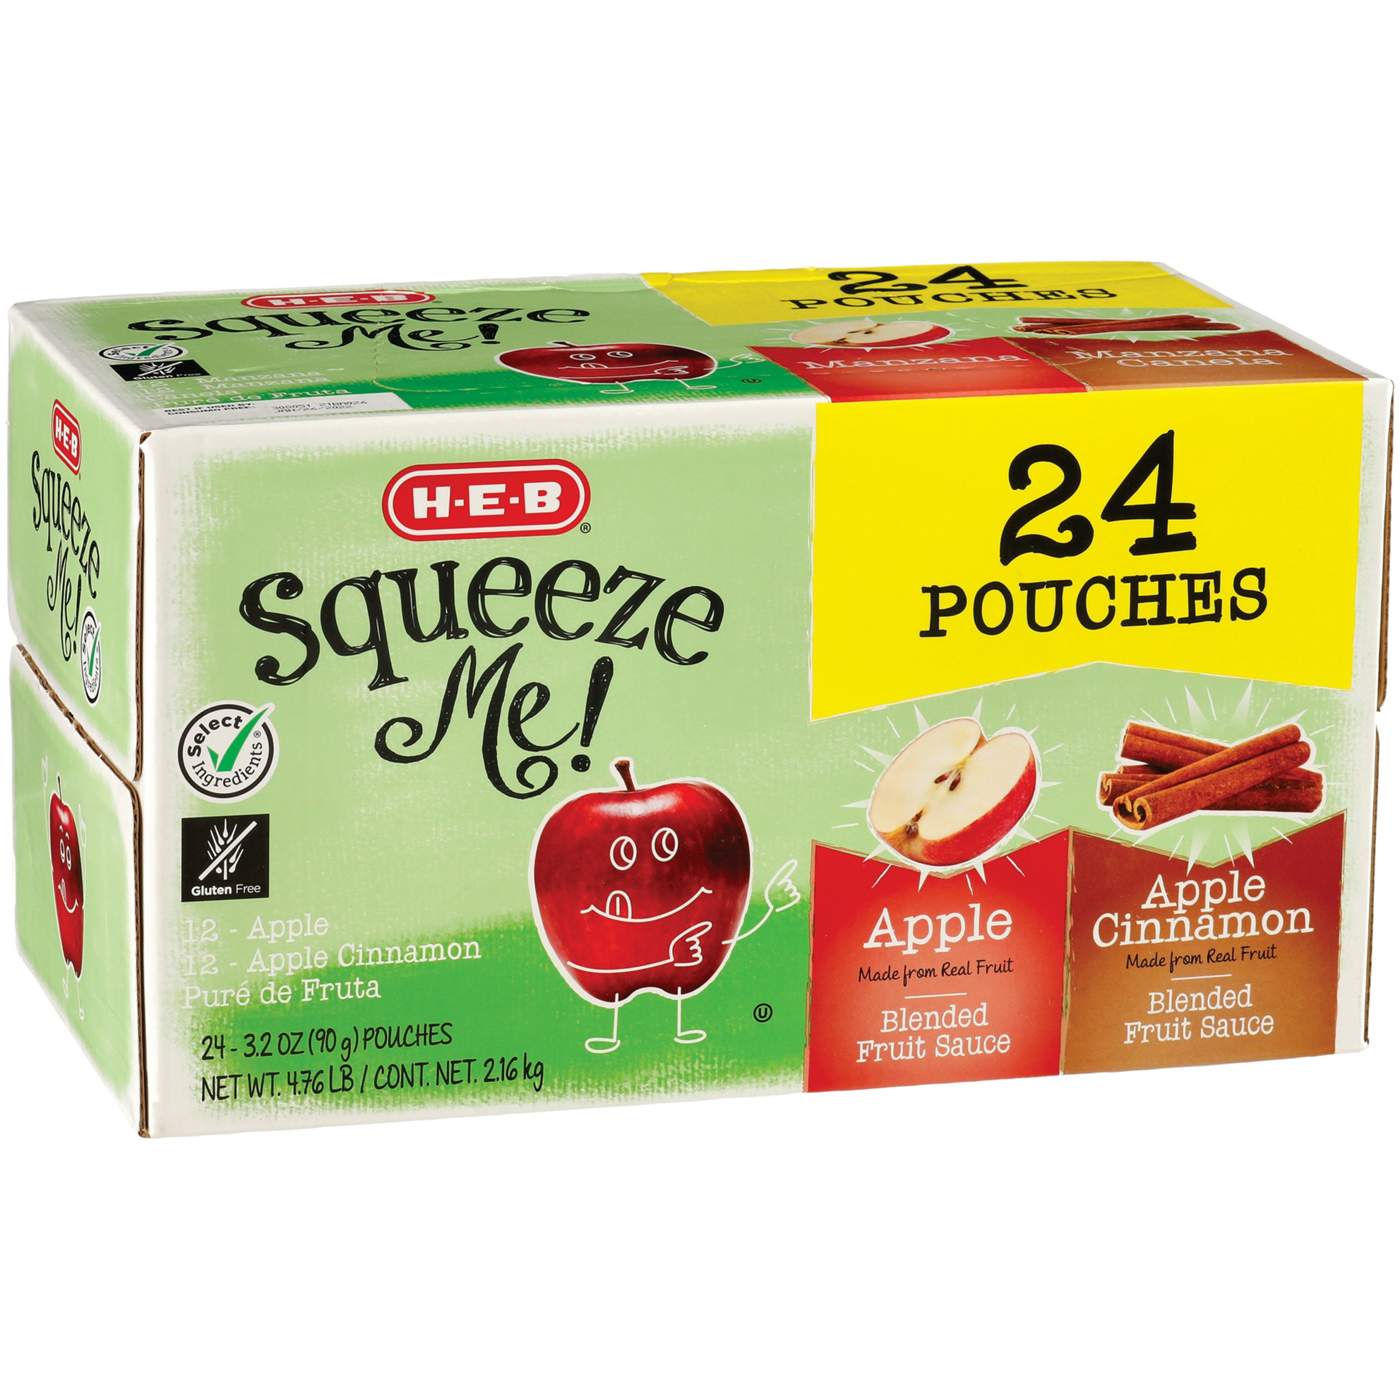 H-E-B Squeeze Me! Applesauce Pouches - Apple & Apple Cinnamon; image 1 of 2